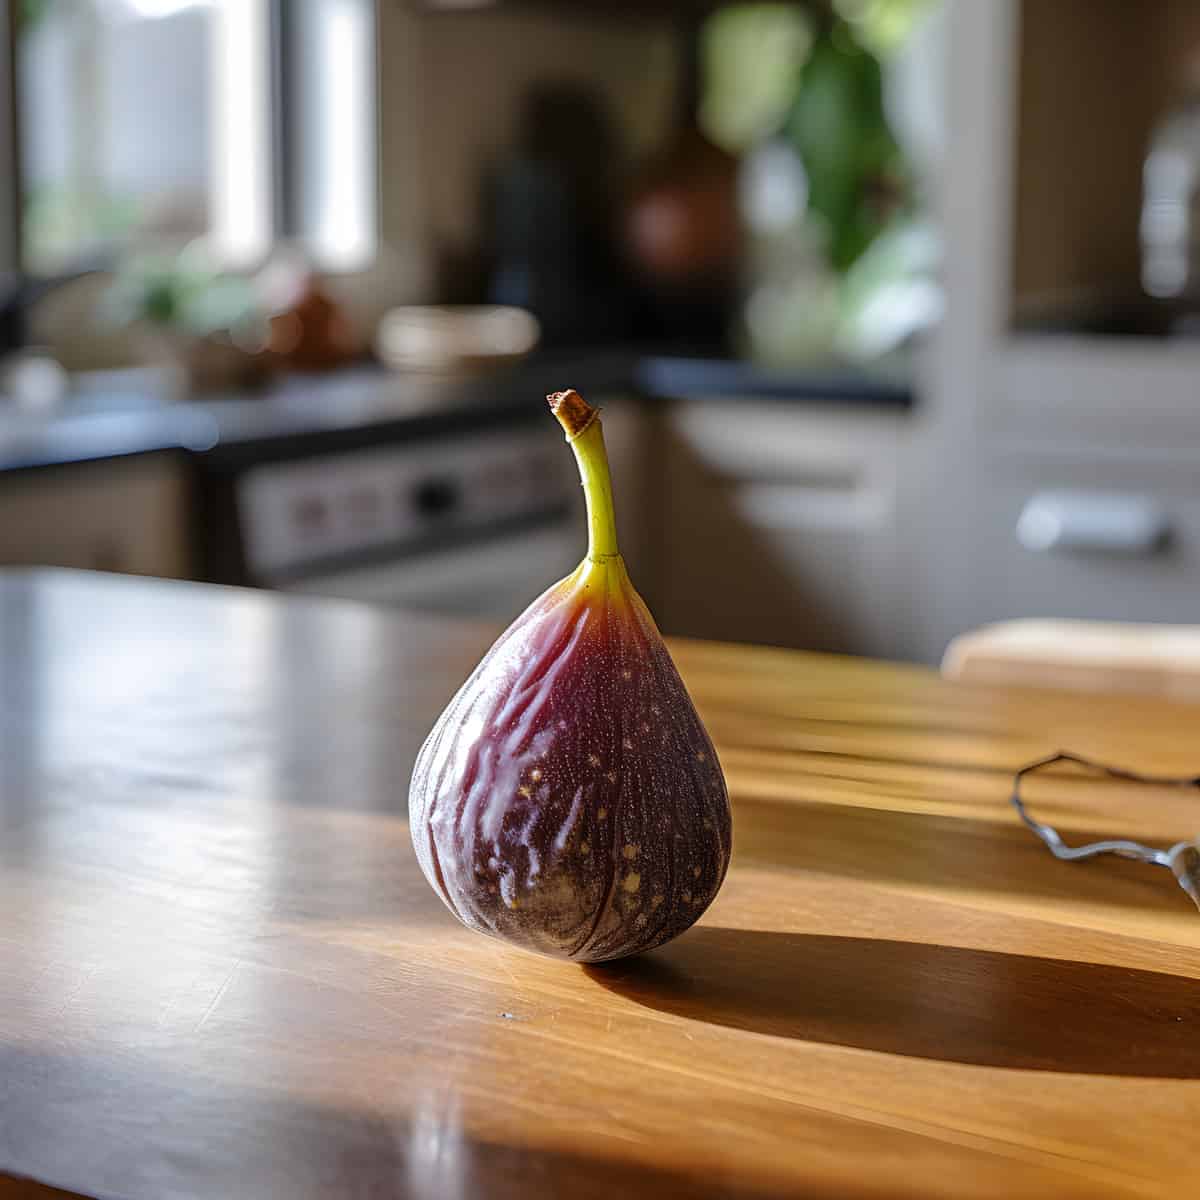 River Sandpaper Fig on a kitchen counter